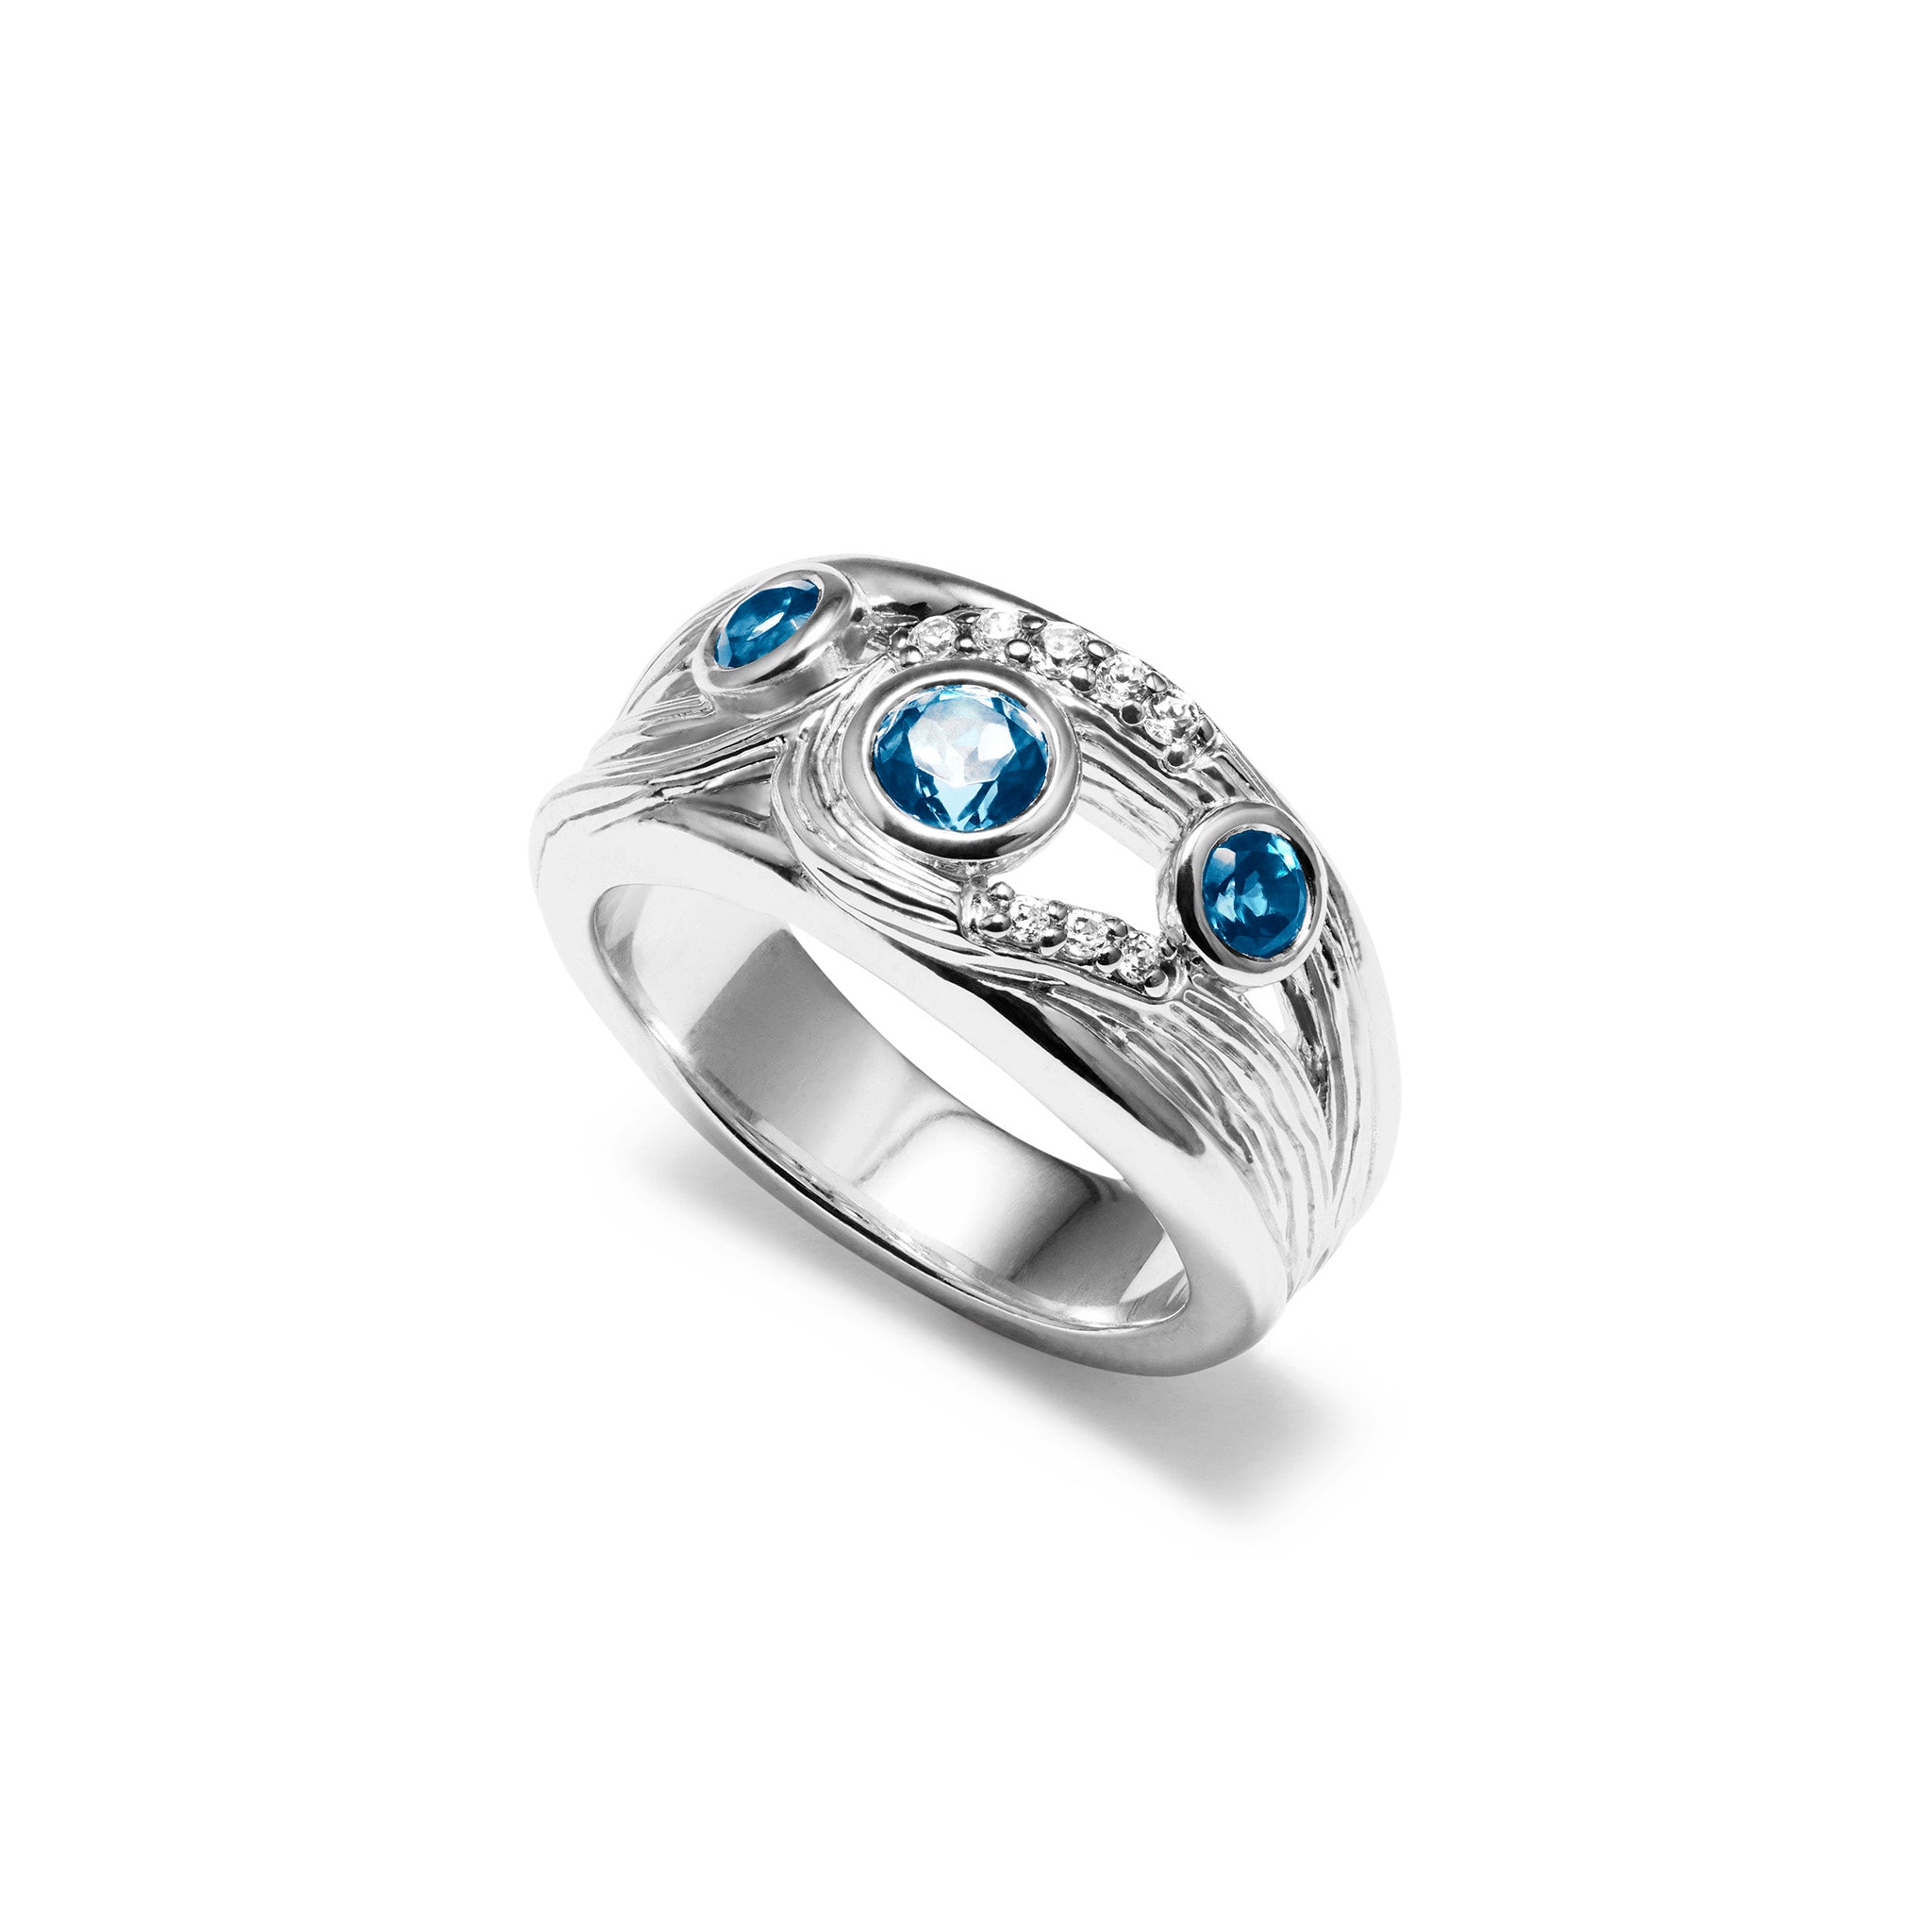 Santorini Band Ring with London Blue Topaz and Diamonds